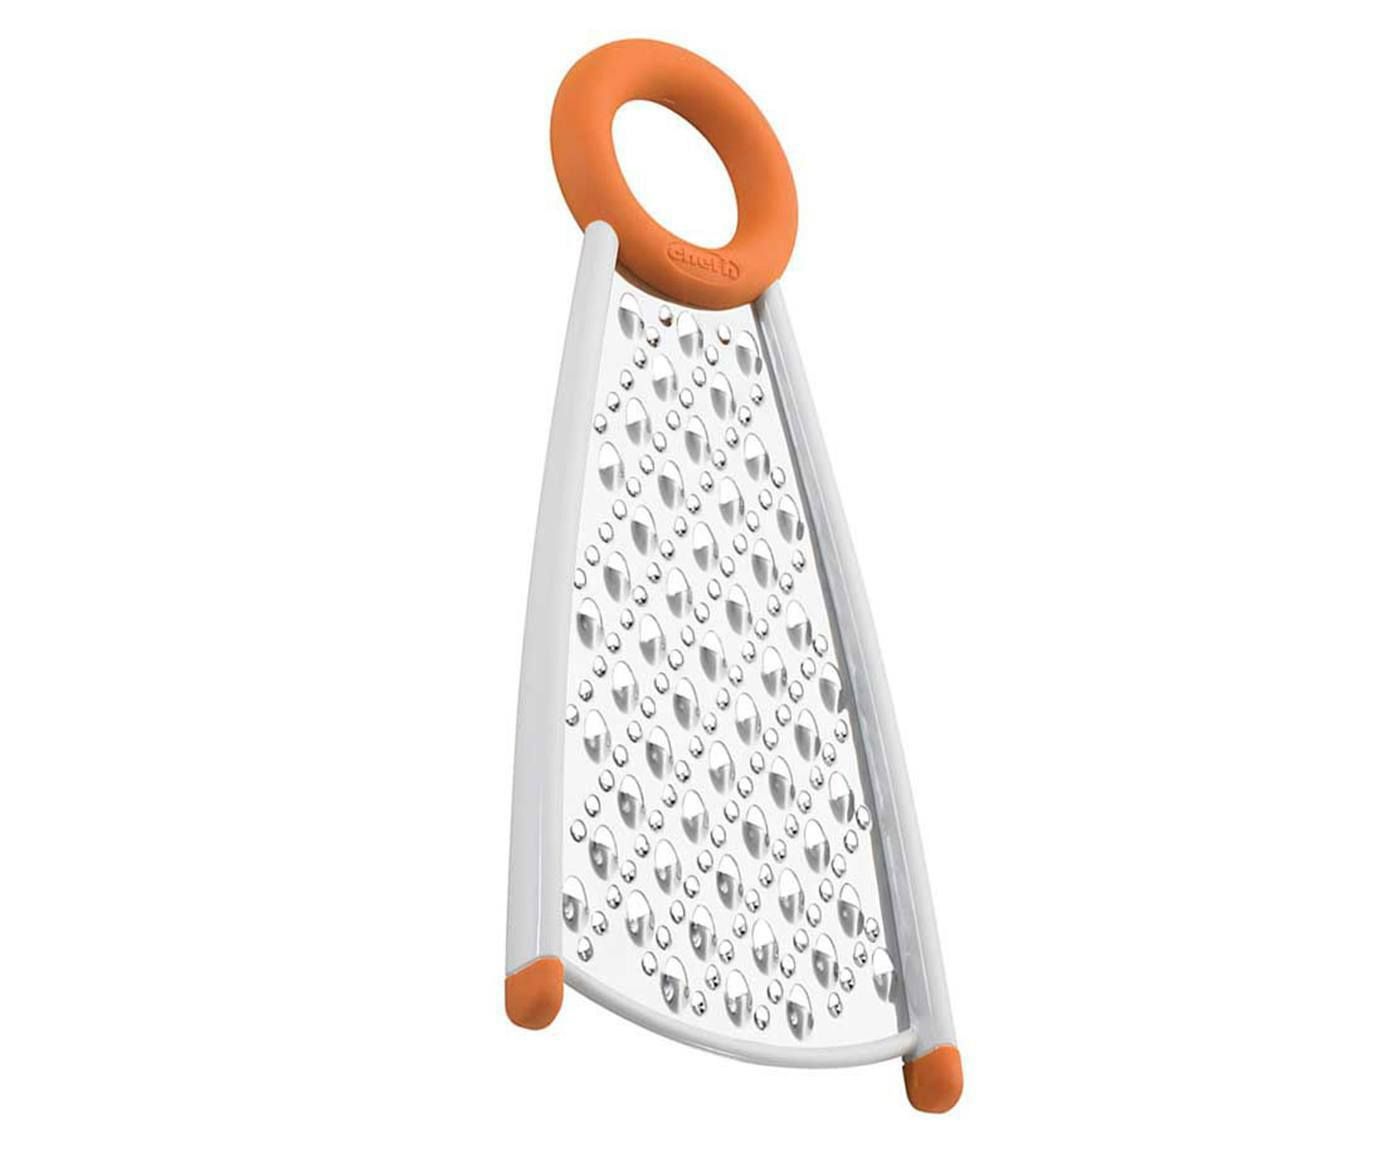 Ralador dual grater - chef'n | Westwing.com.br